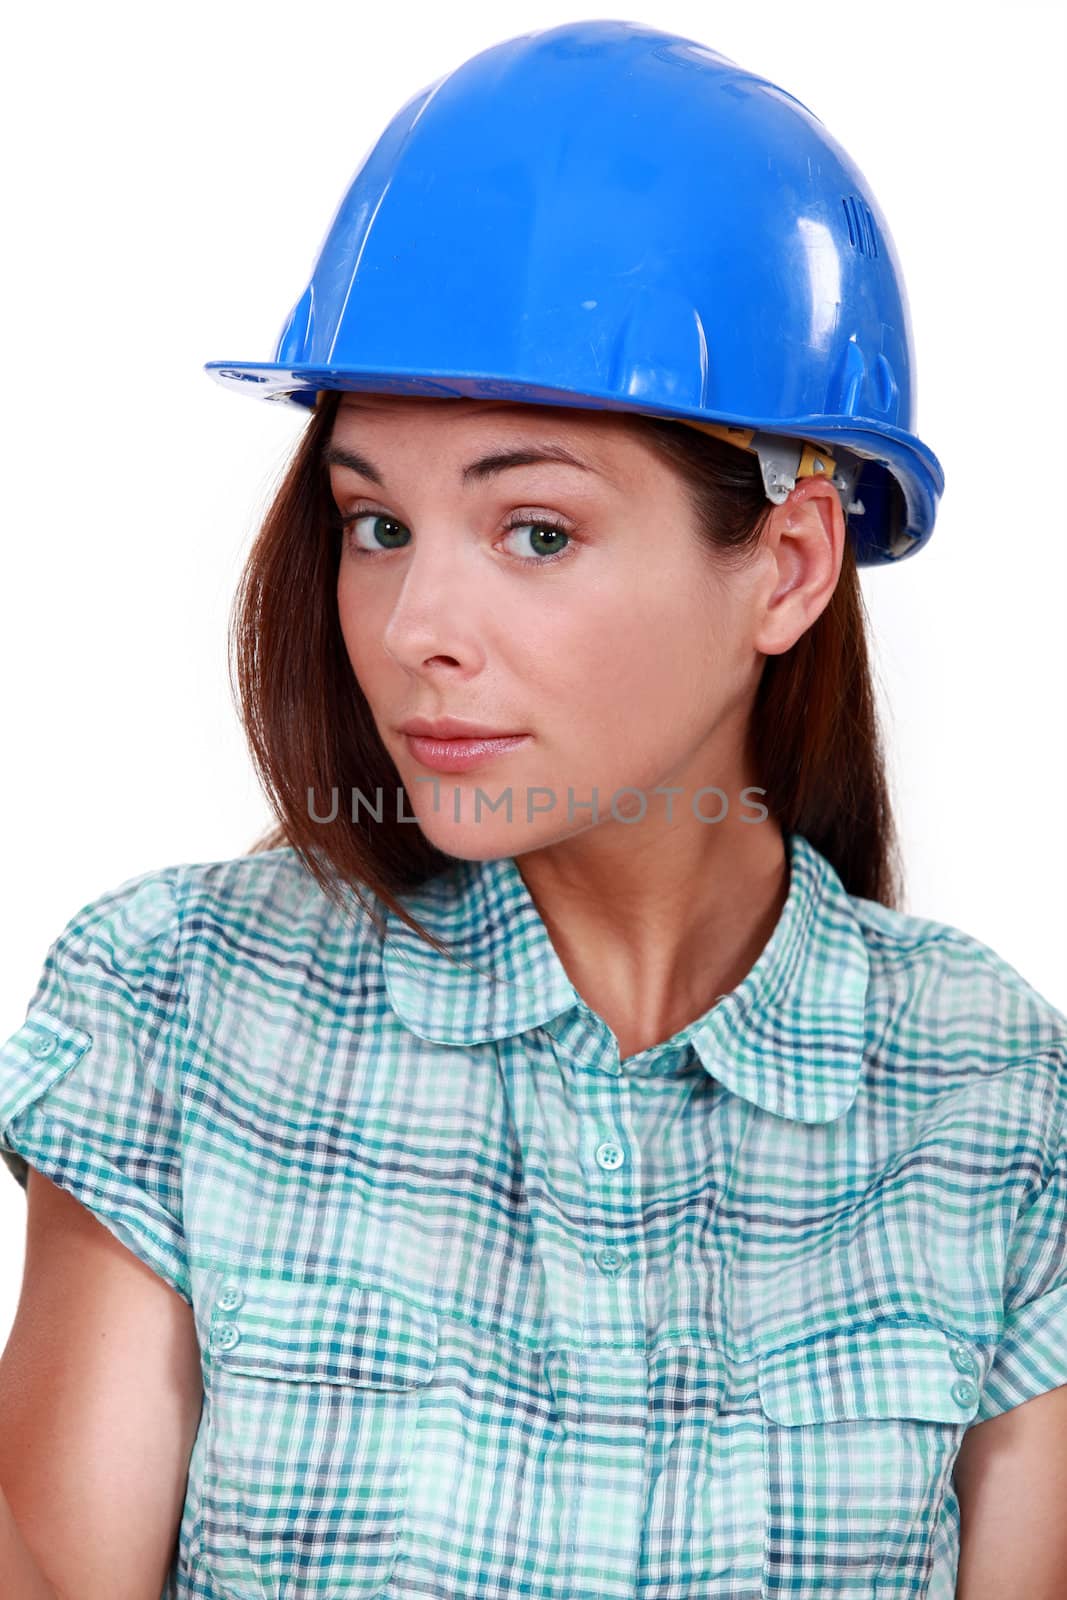 A female construction worker. by phovoir